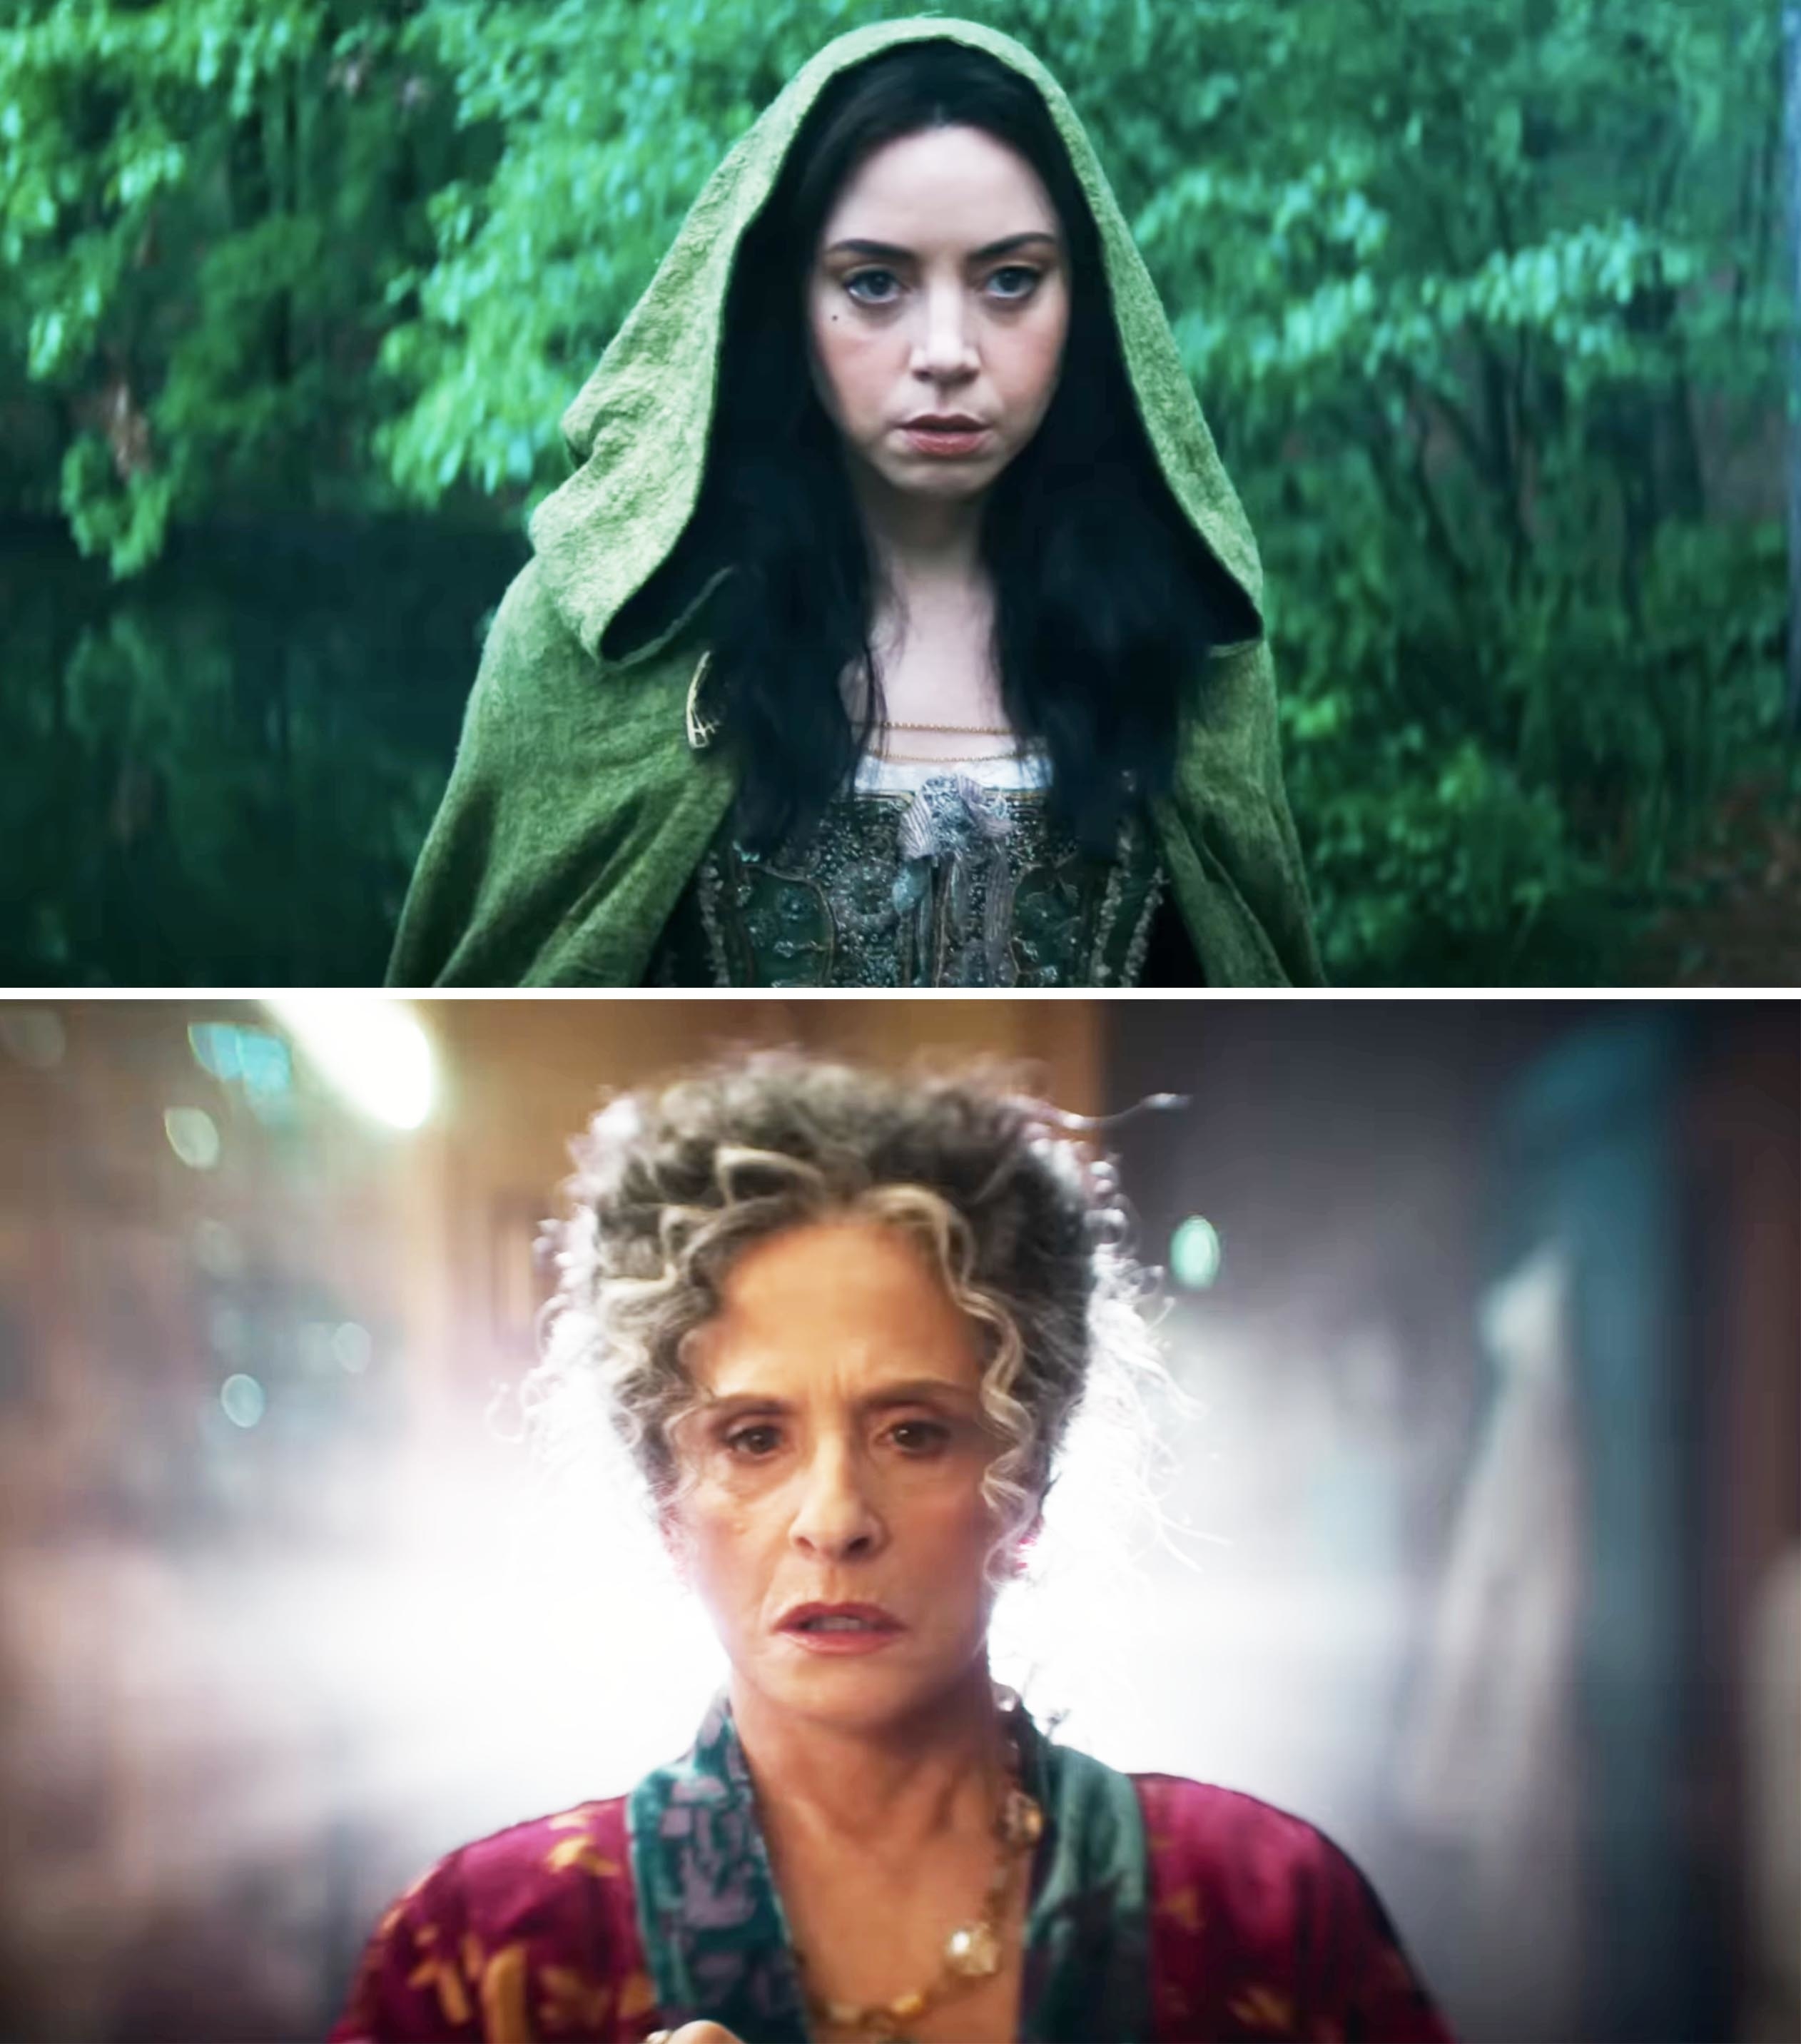 Aubrey Plaza in a hooded medieval-style outfit; Patti LuPone in vintage attire with curly hair, both in scenes from &#x27;Agatha: Coven of Chaos&#x27;